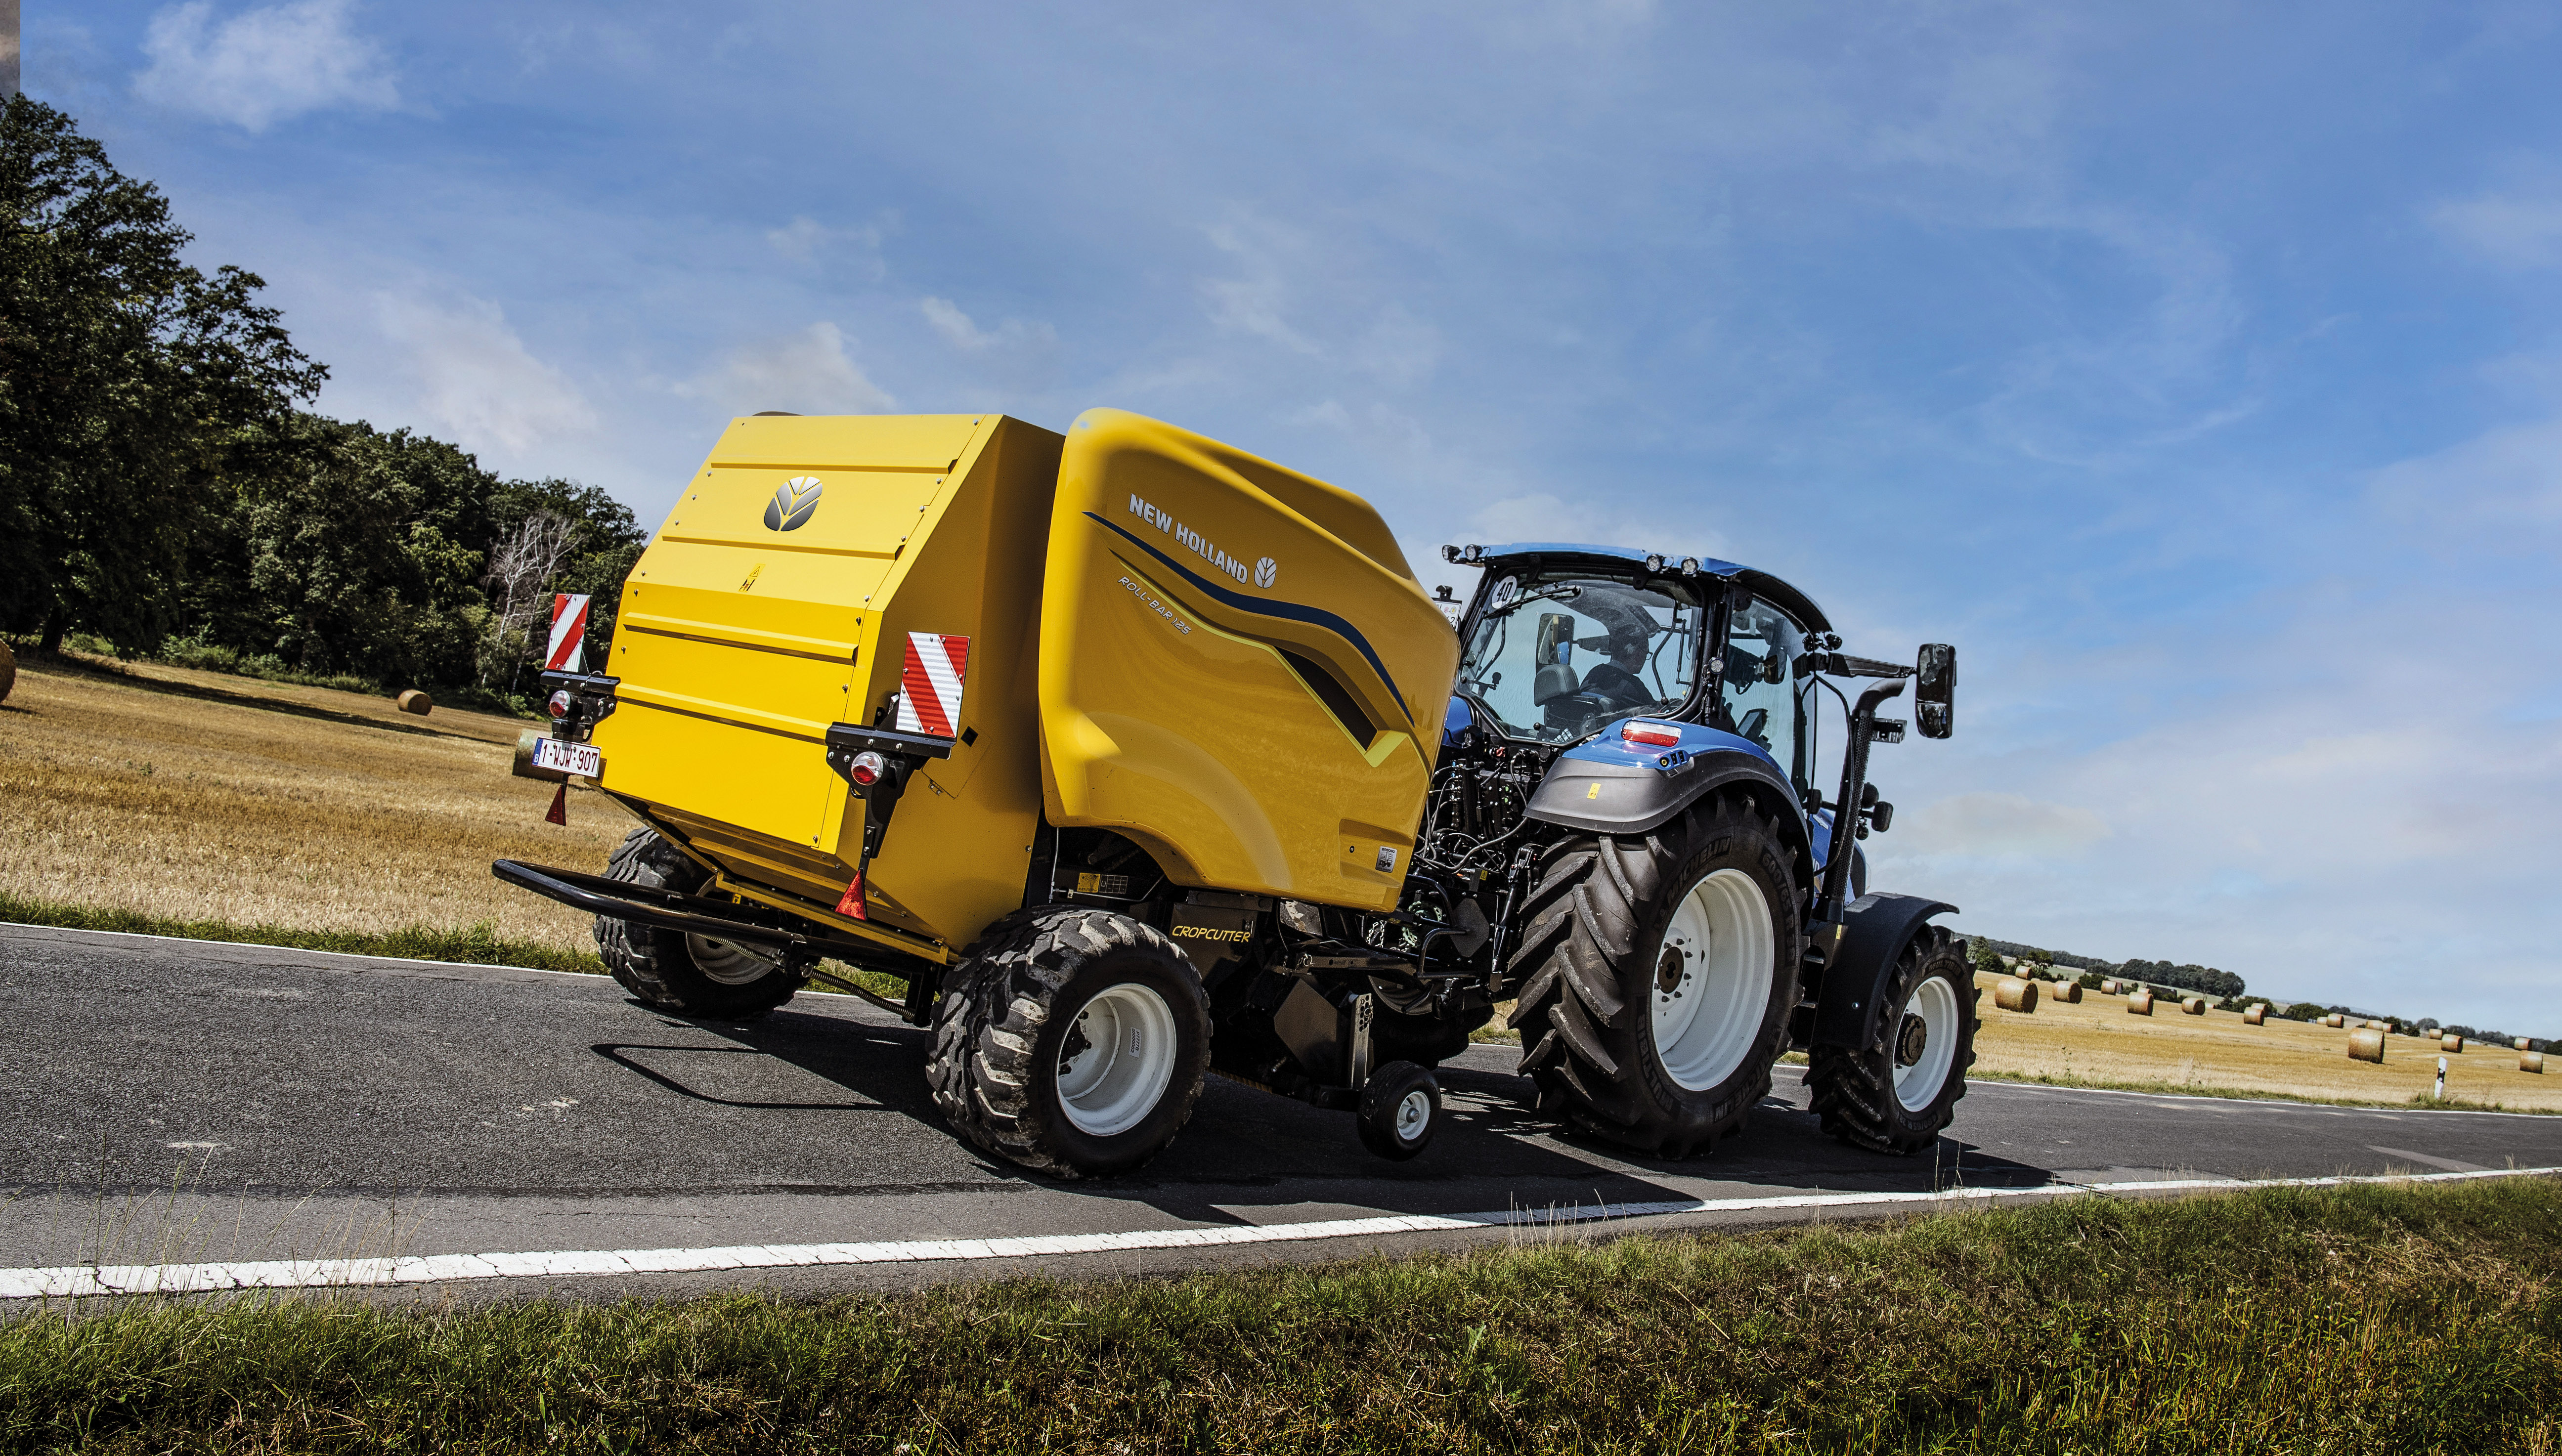 New Holland launches new Roll-Bar 125 fixed chamber round baler